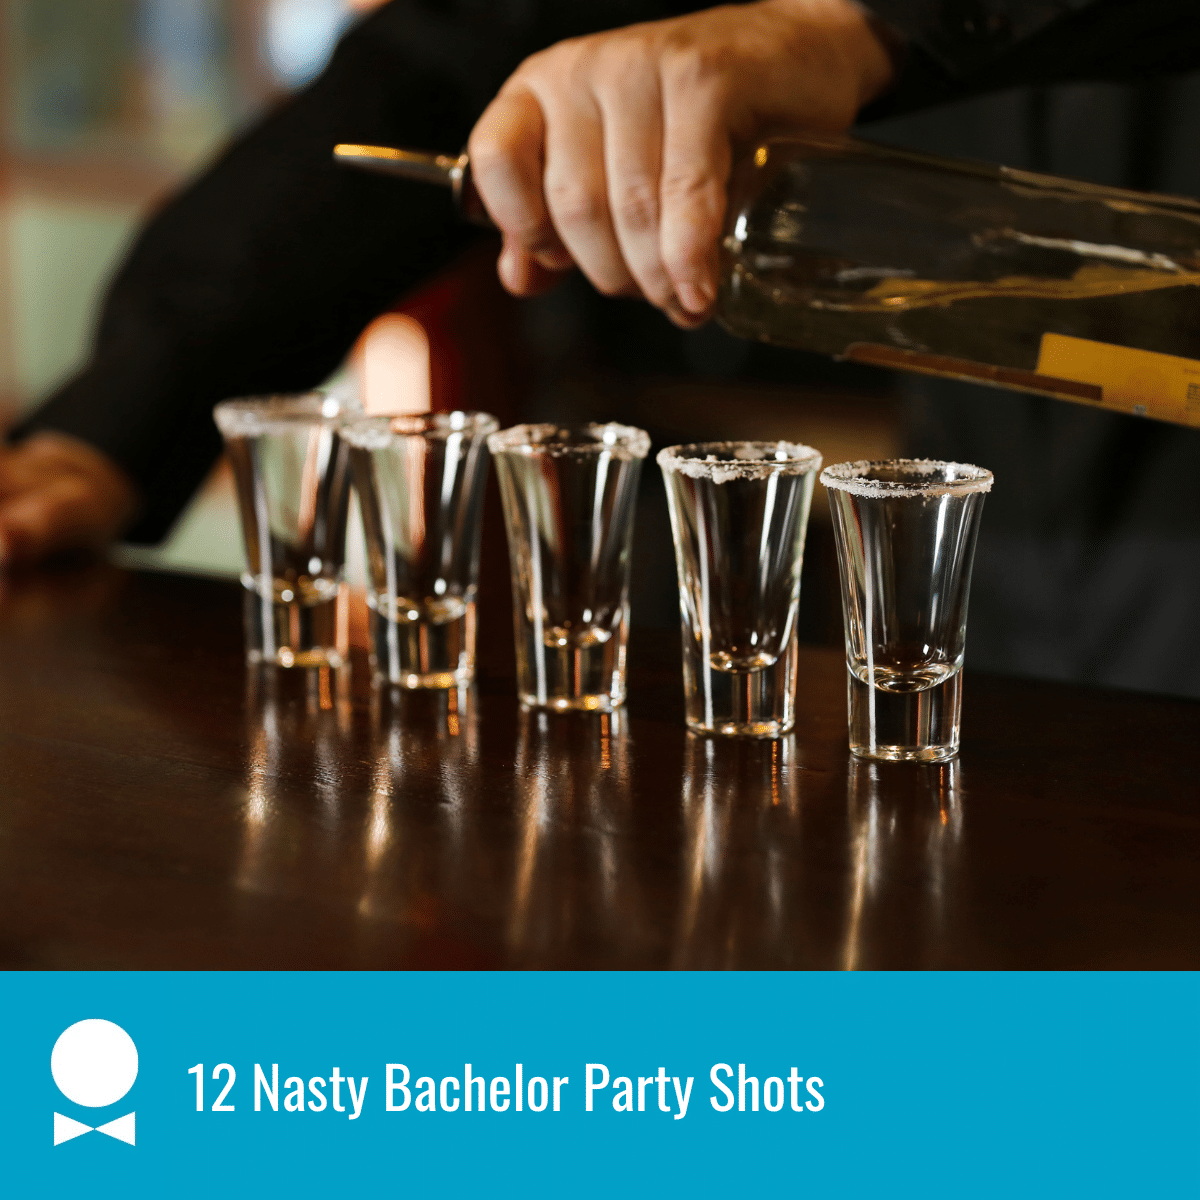 featured image for nasty bachelor party shots with image of person pouring shots